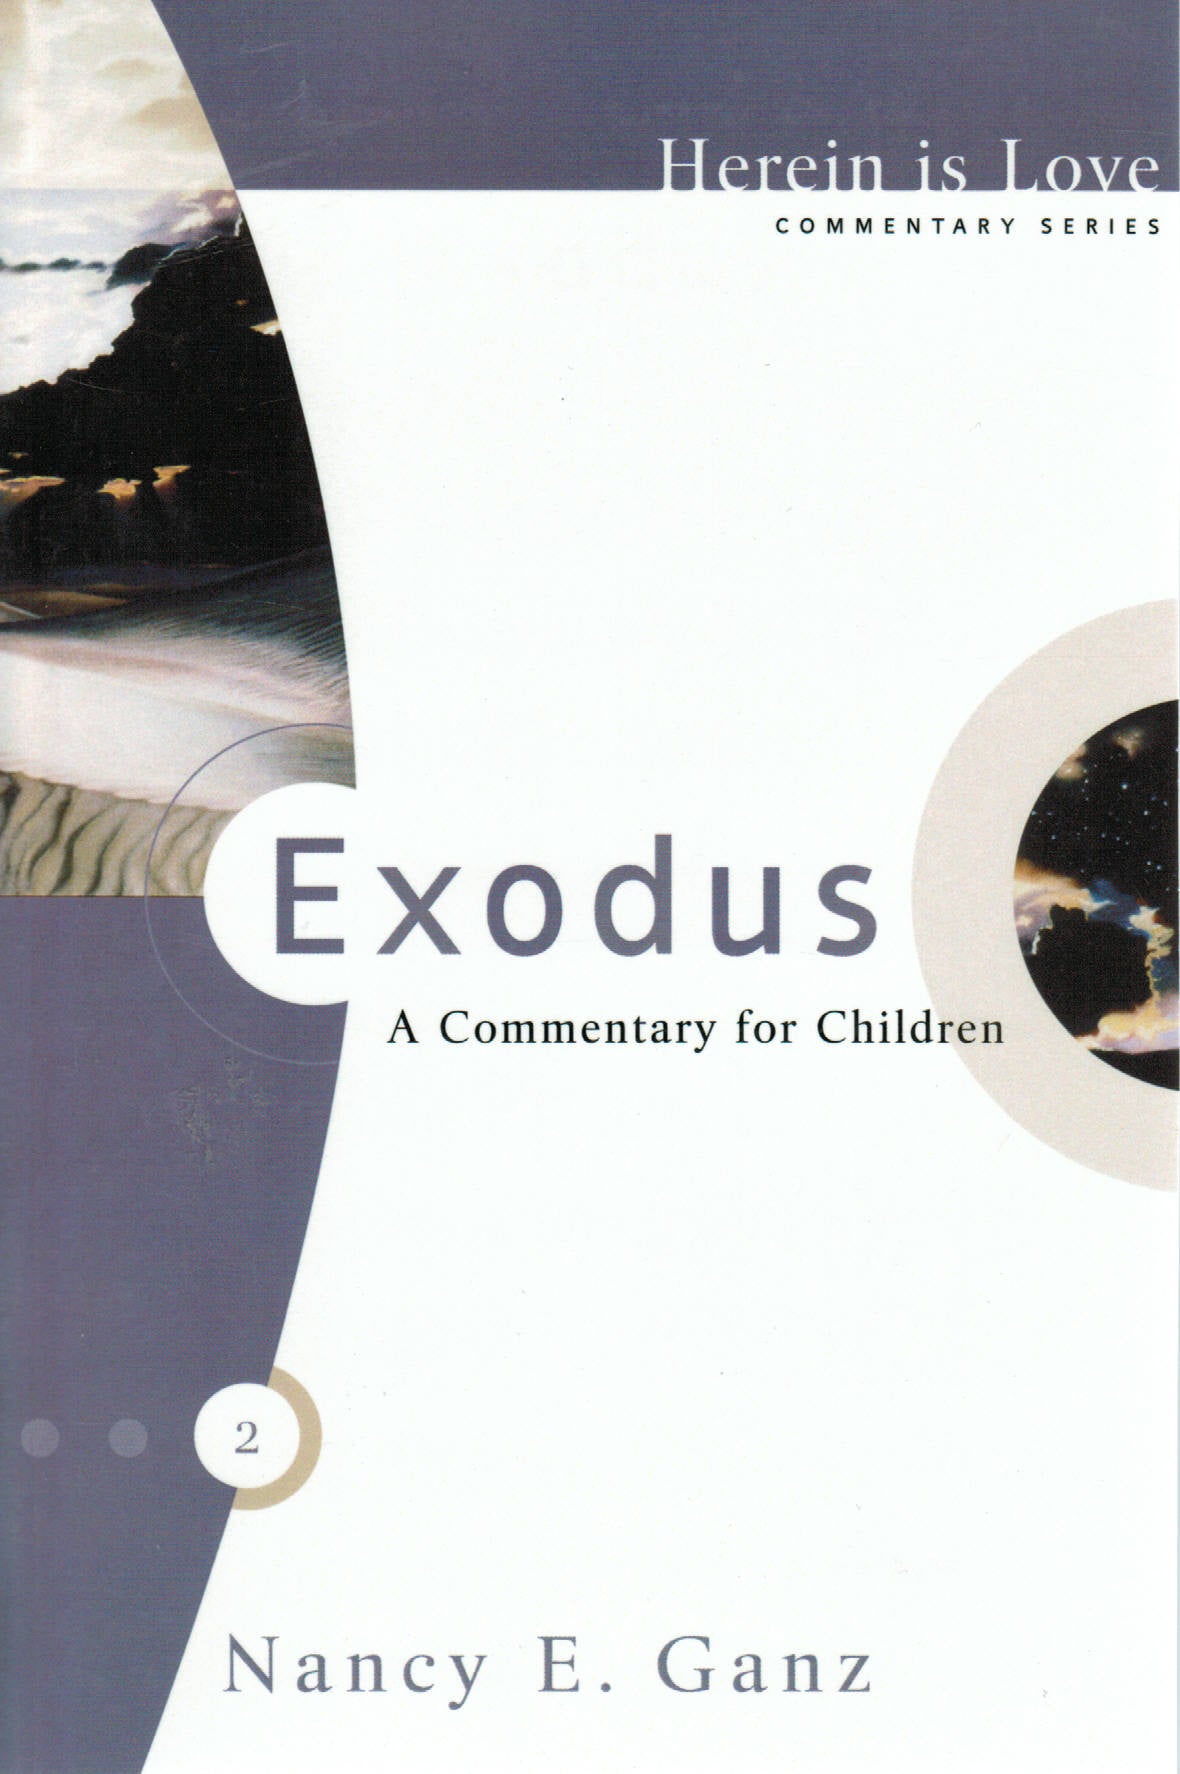 Herein is Love - Exodus: A Commentary for Children